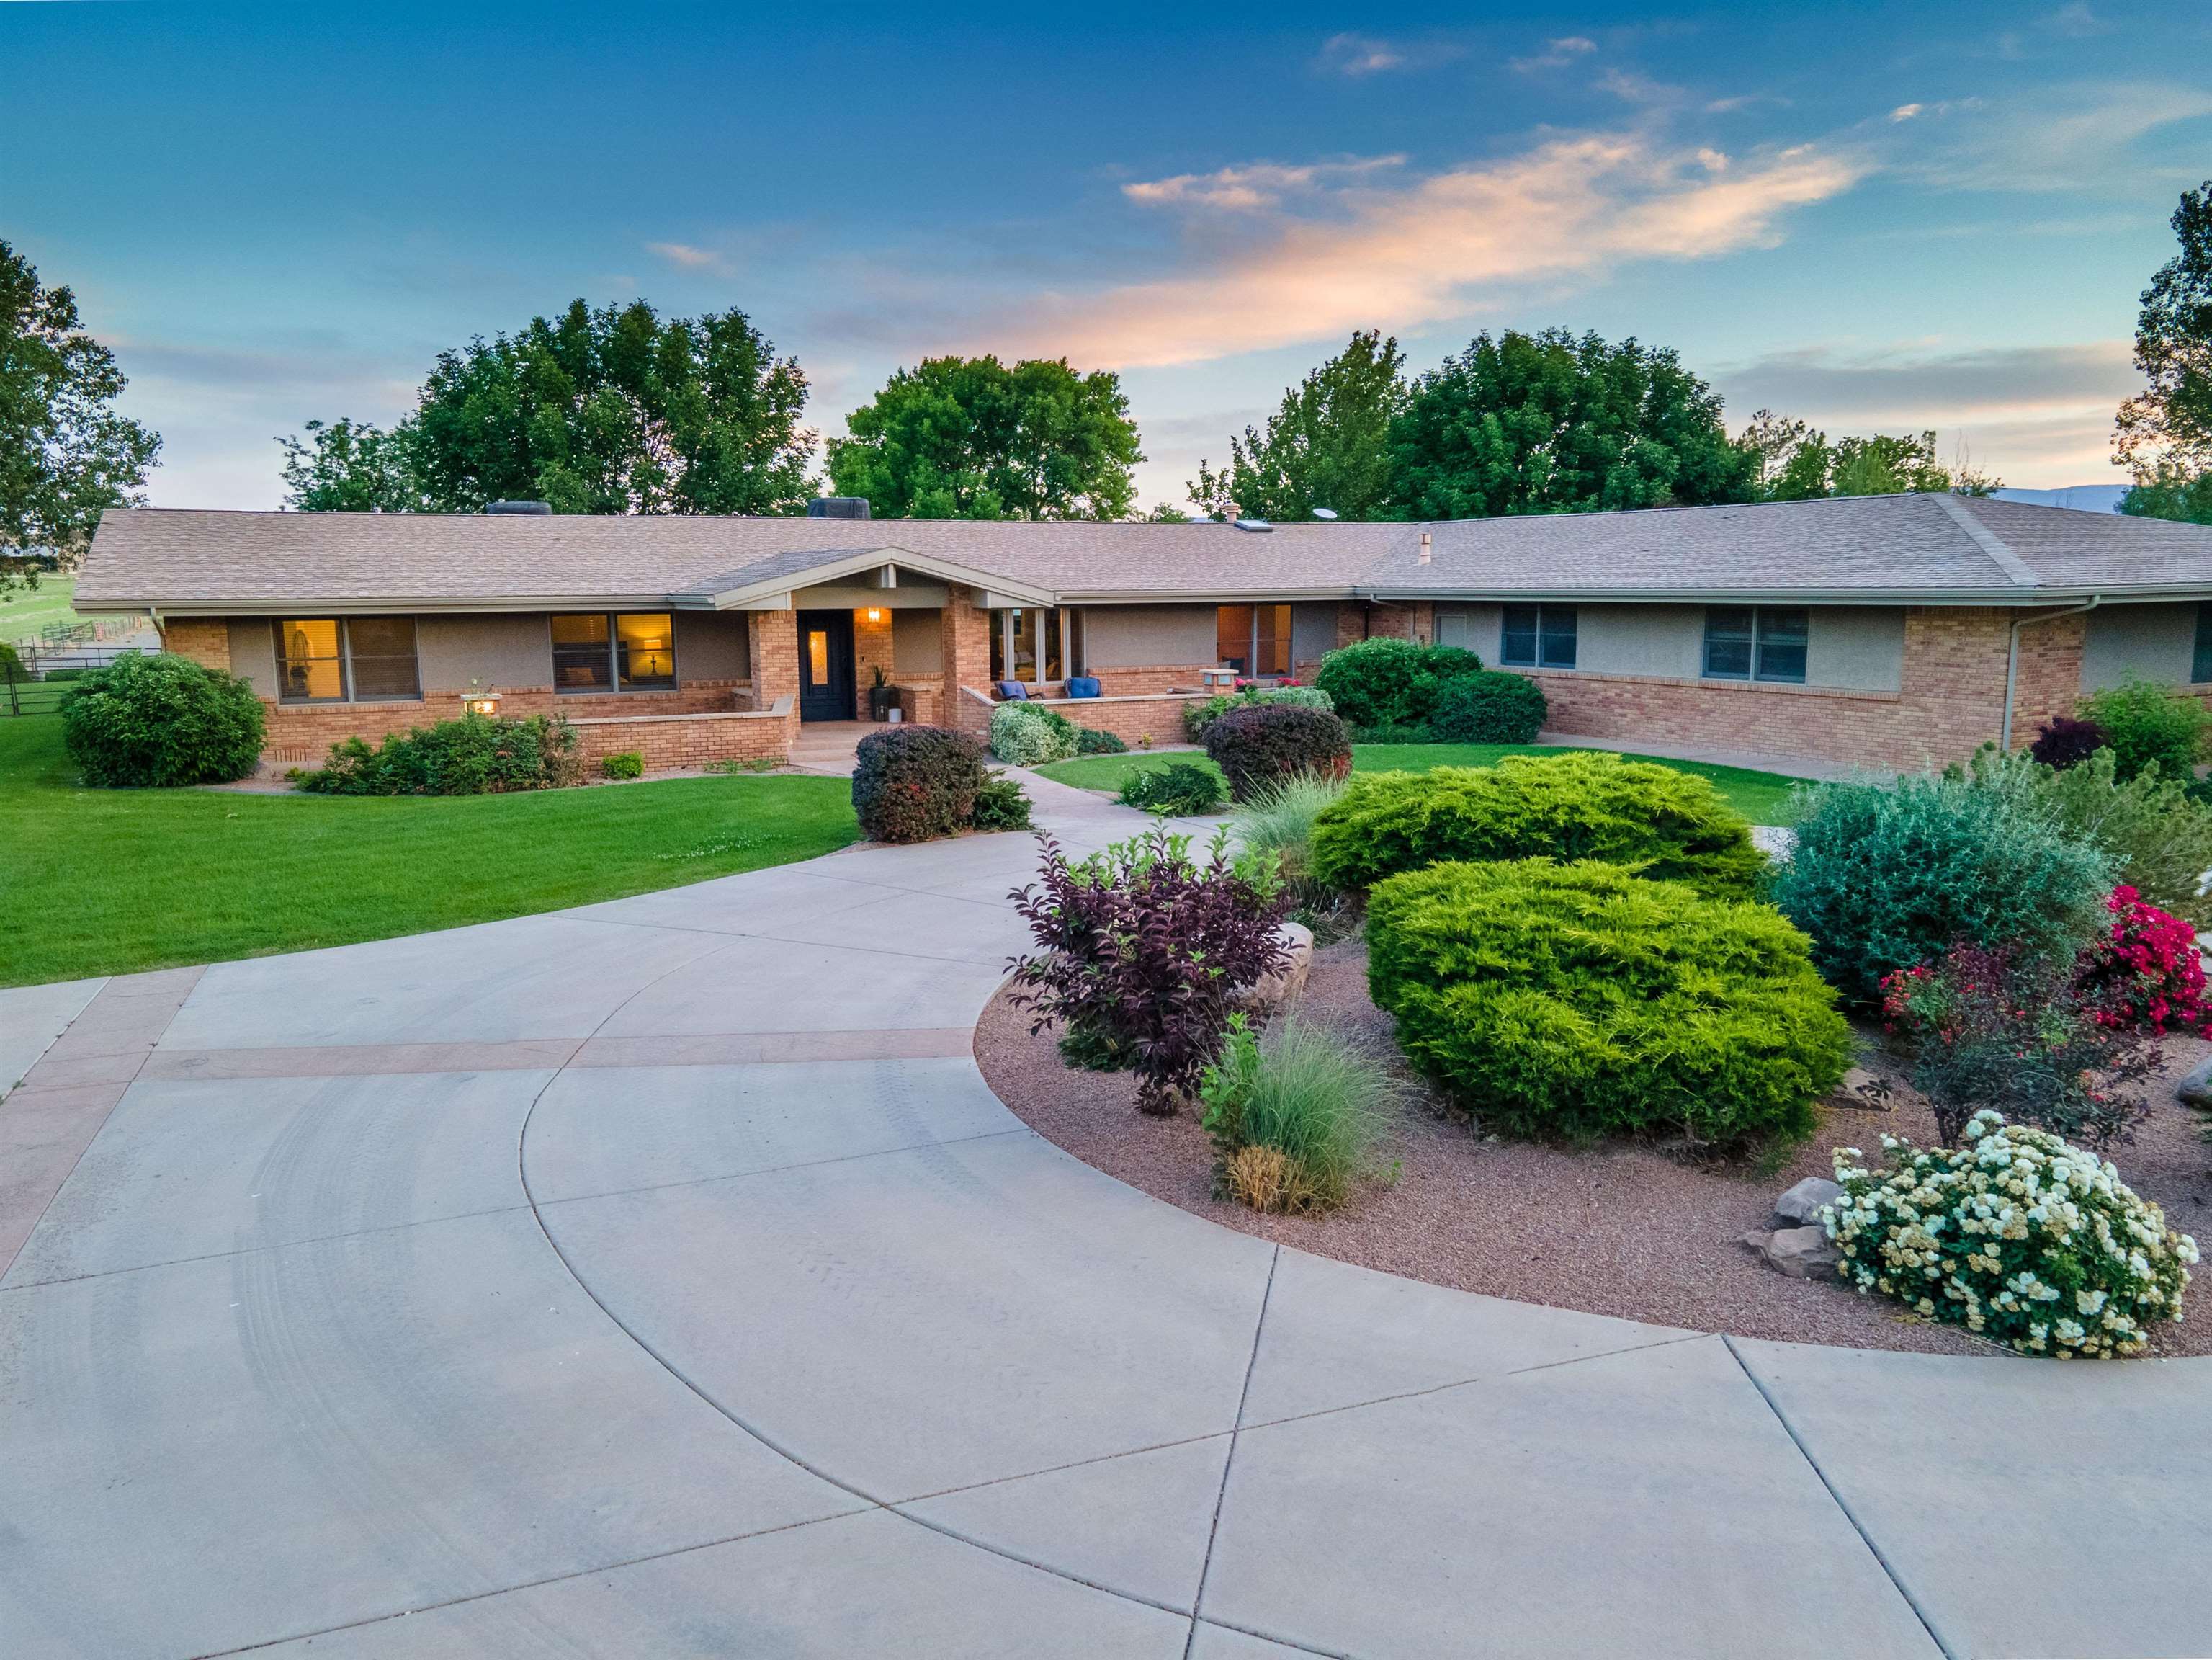 Picturesque custom brick ranch on 7 irrigated acres on East Orchard Mesa. A grand entrance with circular drive greets you as you enter this beautifully landscaped property. Showcasing views of both Mt. Garfield and the Grand Mesa, it’s a slice of heaven in Fruit & Wine Country.  The well-appointed kitchen boasts quartz countertops and Thermador stainless steel appliances and opens to a spacious formal dining area and great room. Vaulted ceilings and a custom stone fireplace make the space cozy and inviting. It’s an entertainer’s dream! The home also features a large butler’s pantry off the kitchen with plenty of cabinetry and shelving. Three spacious bedrooms on the main floor all complete with impressive ensuite bathrooms – one suite can be locked off from the rest of the home and has its own exterior entrance. Perfect for a short term rental or private guest suite. A large rec room, additional bedroom and office space are located in the fully finished basement. Generous outdoor patio features a custom pergola and overlooks a beautiful back lawn, 7 irrigated acres, horse corral, horse barn and metal hay barn. Set up for the equine enthusiast and the property boasts water rights for all 7 acres allowing the buyer to plant peaches/grapes or whatever you choose!